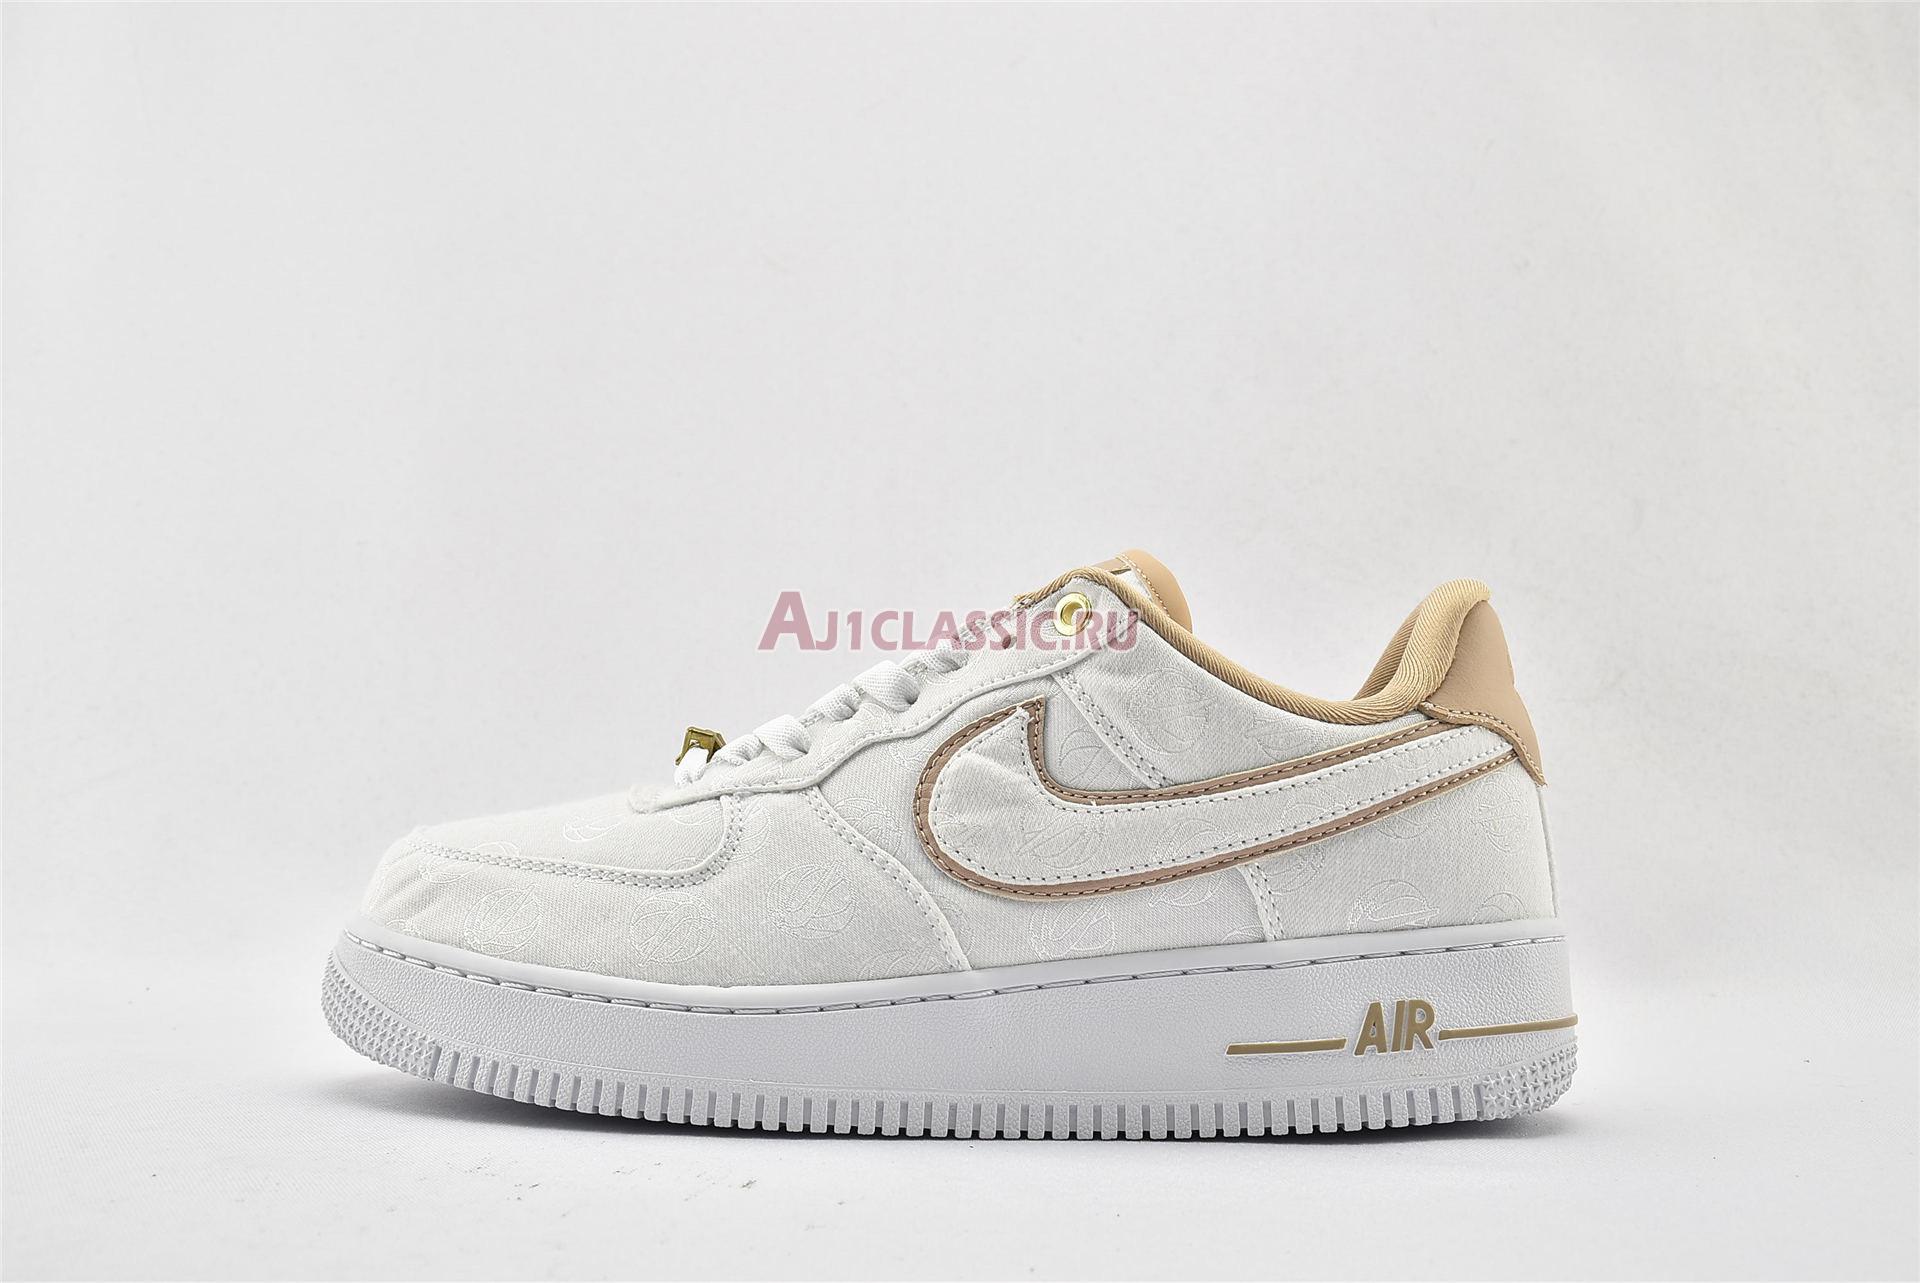 Nike Air Force 1 Low 07 Lux "Basketball Print" 898889-102